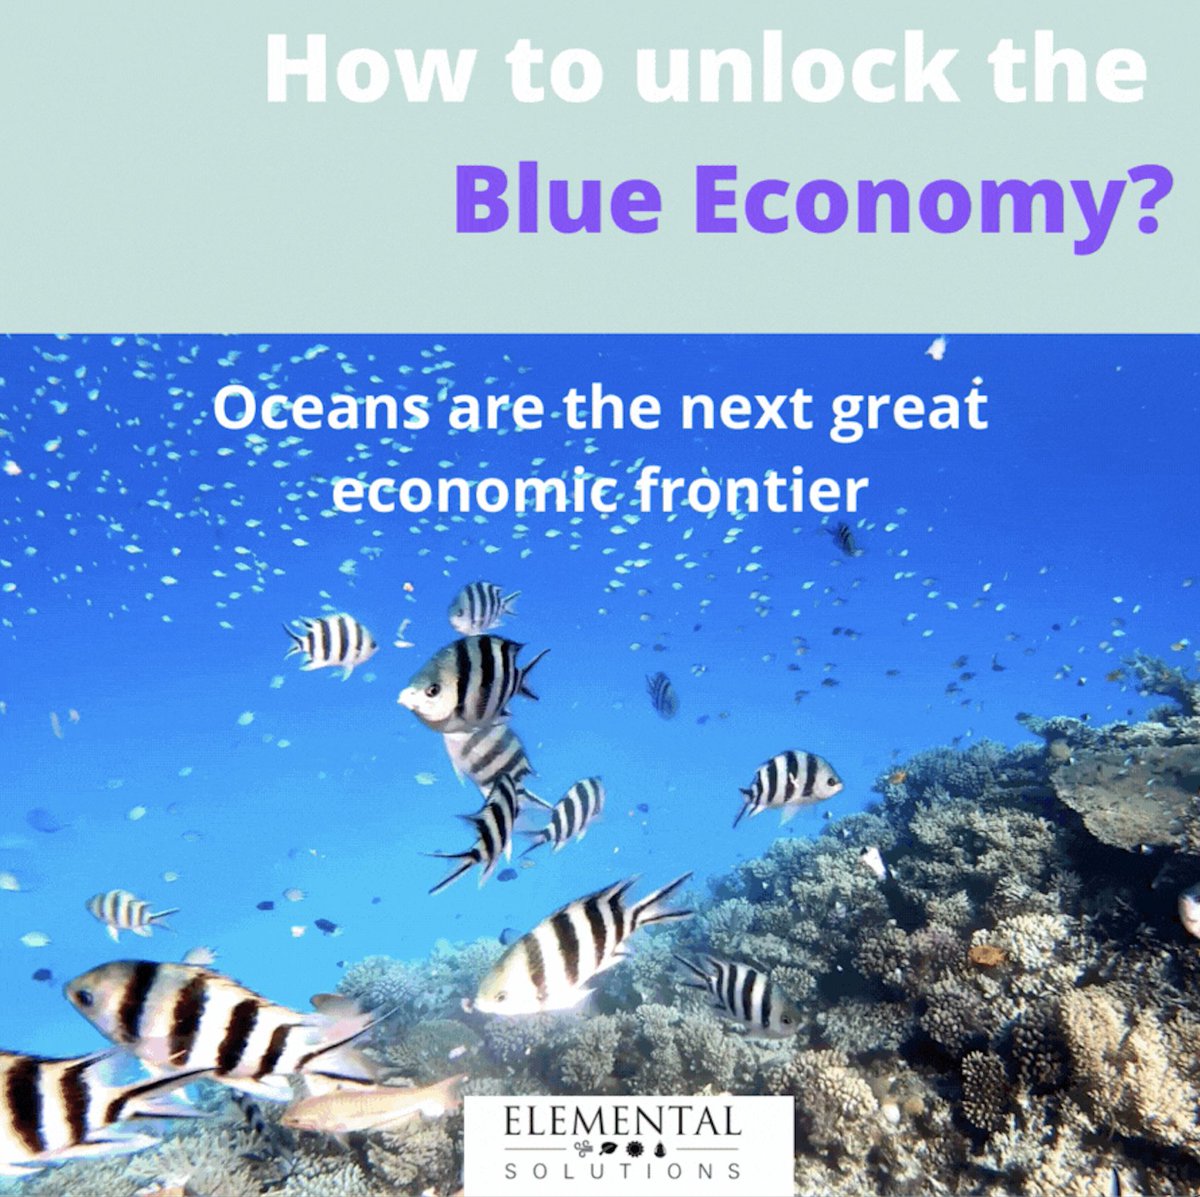 Unlocking the #BlueEconomy with #BlueFinance! 🌊💰

Blue Bonds & Loans fund vital projects like water management, ocean cleanup, marine restoration, + renewable energy.

By 2030, the ocean economy could hit $3T and employ 40M people.

#SustainableFinance #ClimateSolutions